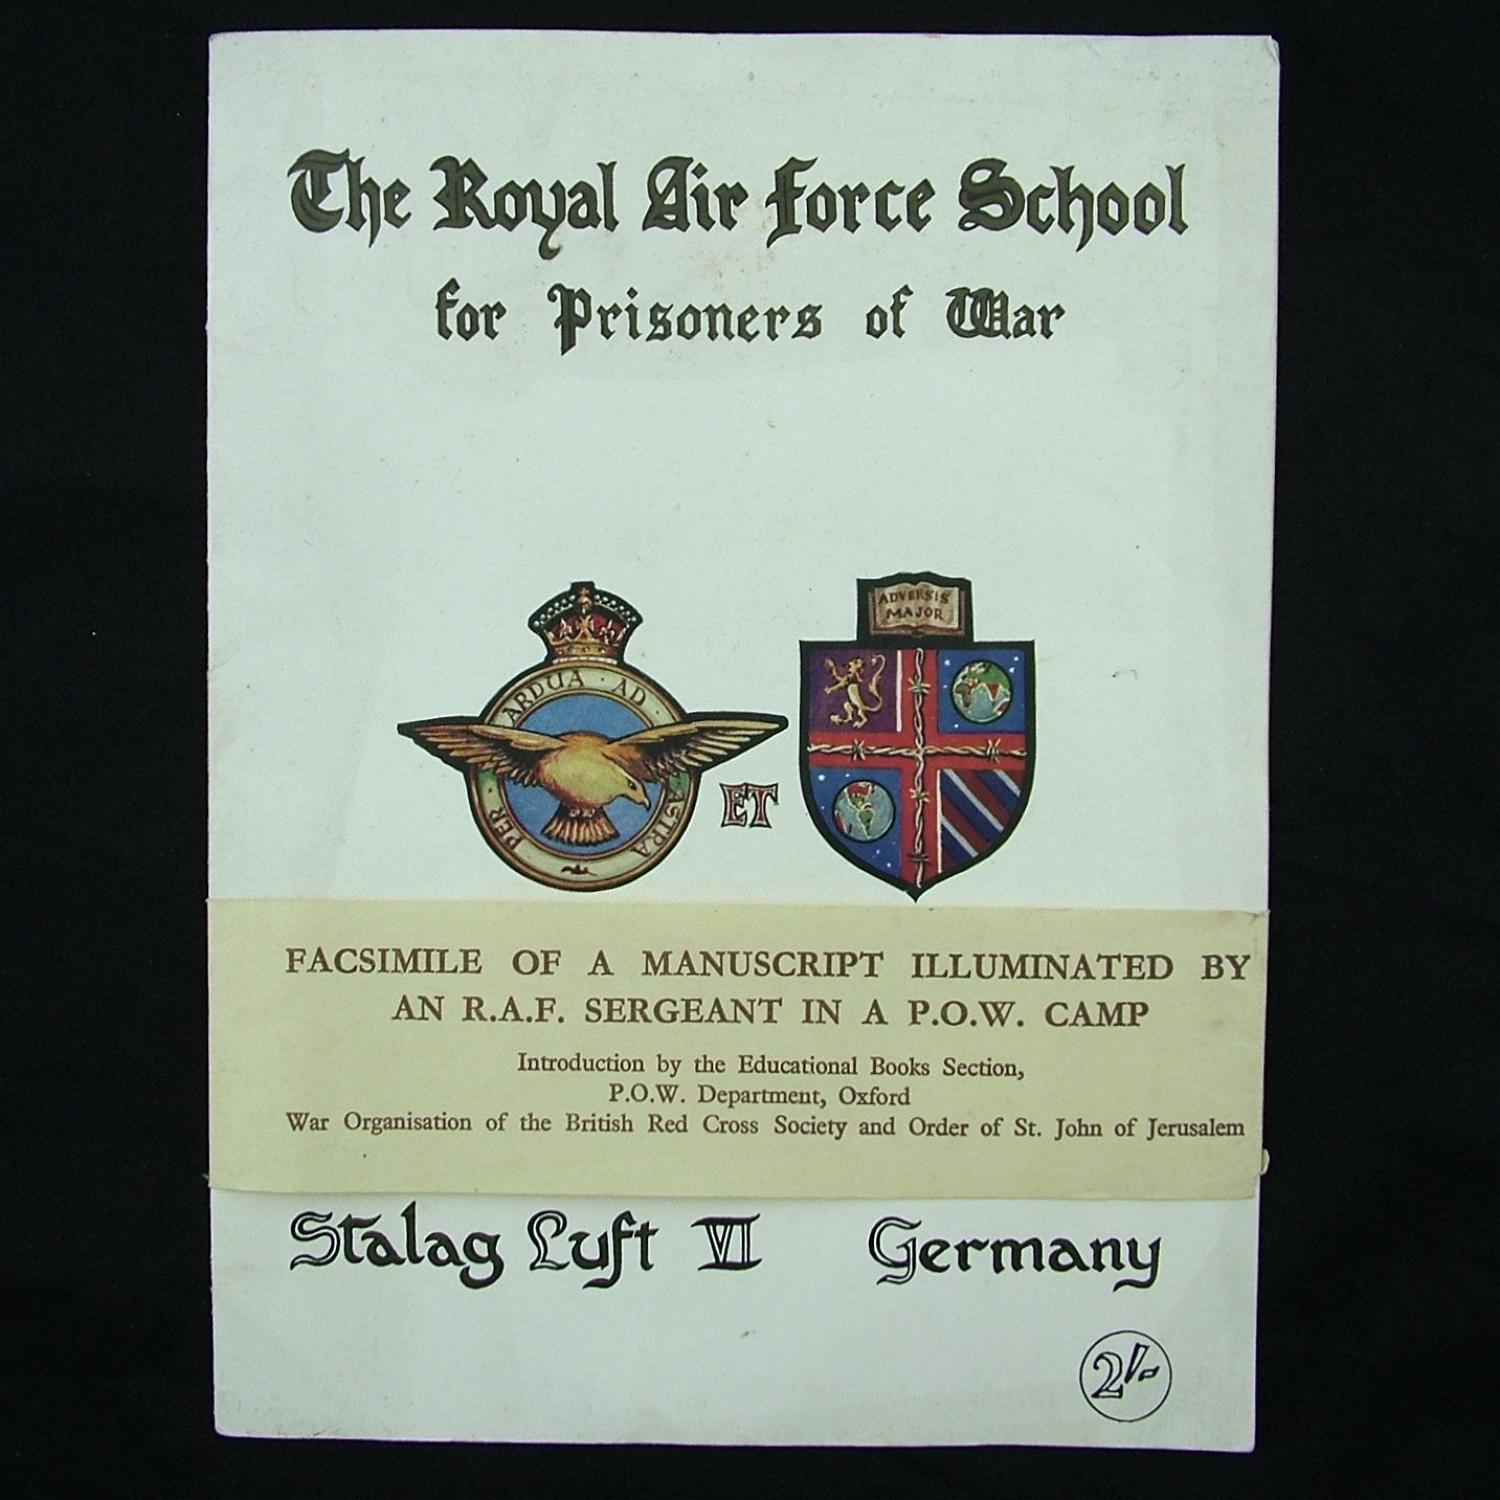 The Royal Air Force school for prisoners of war